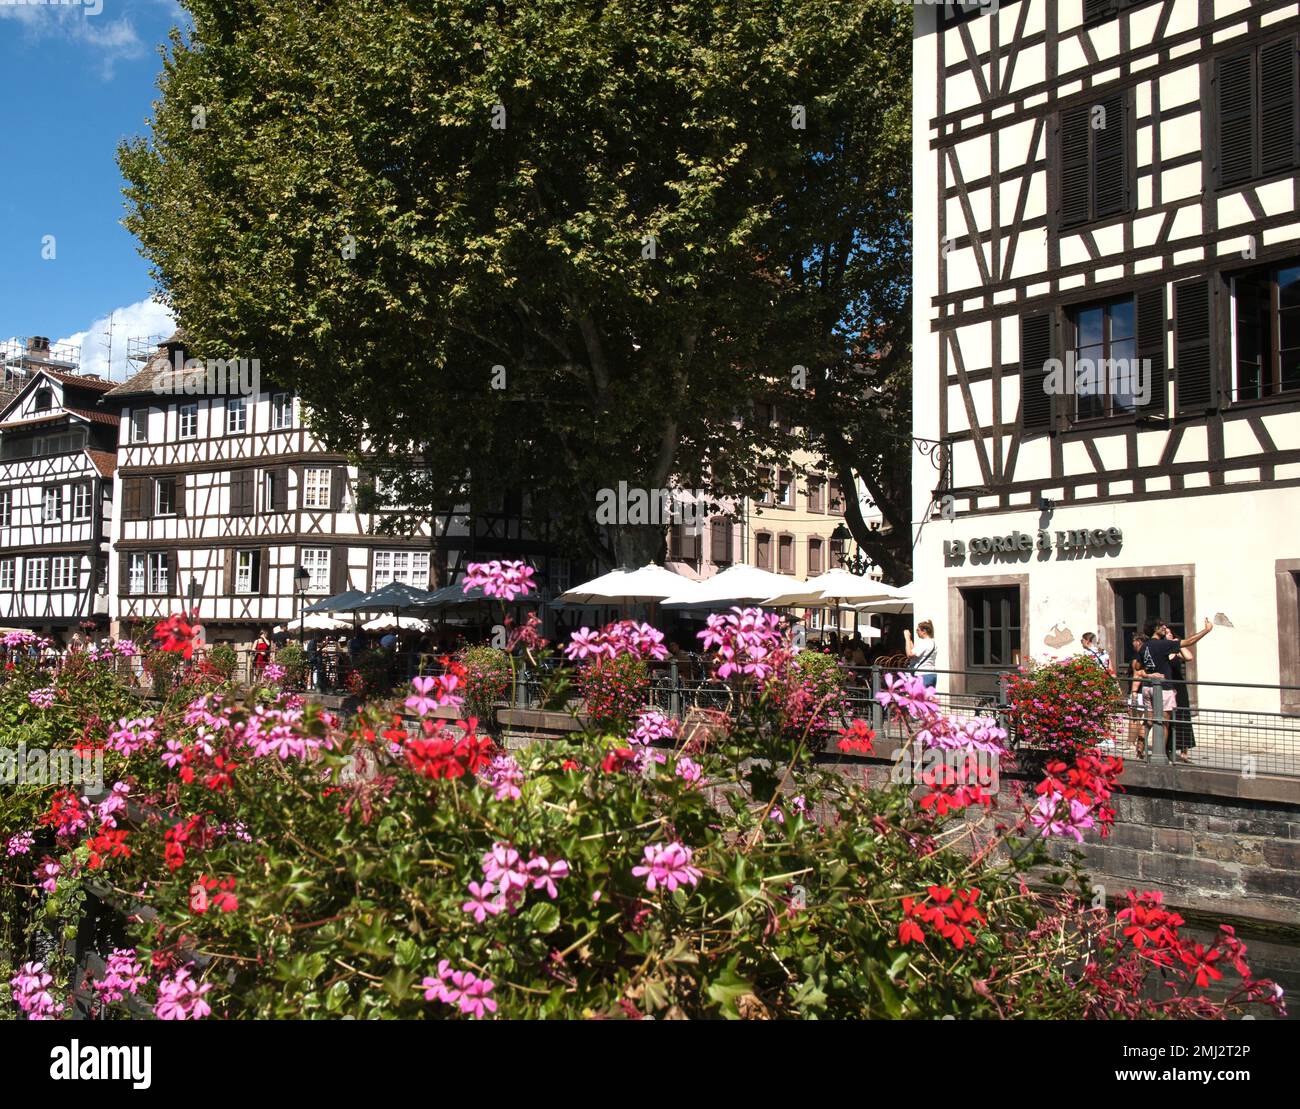 Half-timbered buildings, flowers and cafe terrace near canalside ,Strasbourg, Alsace, France Stock Photo